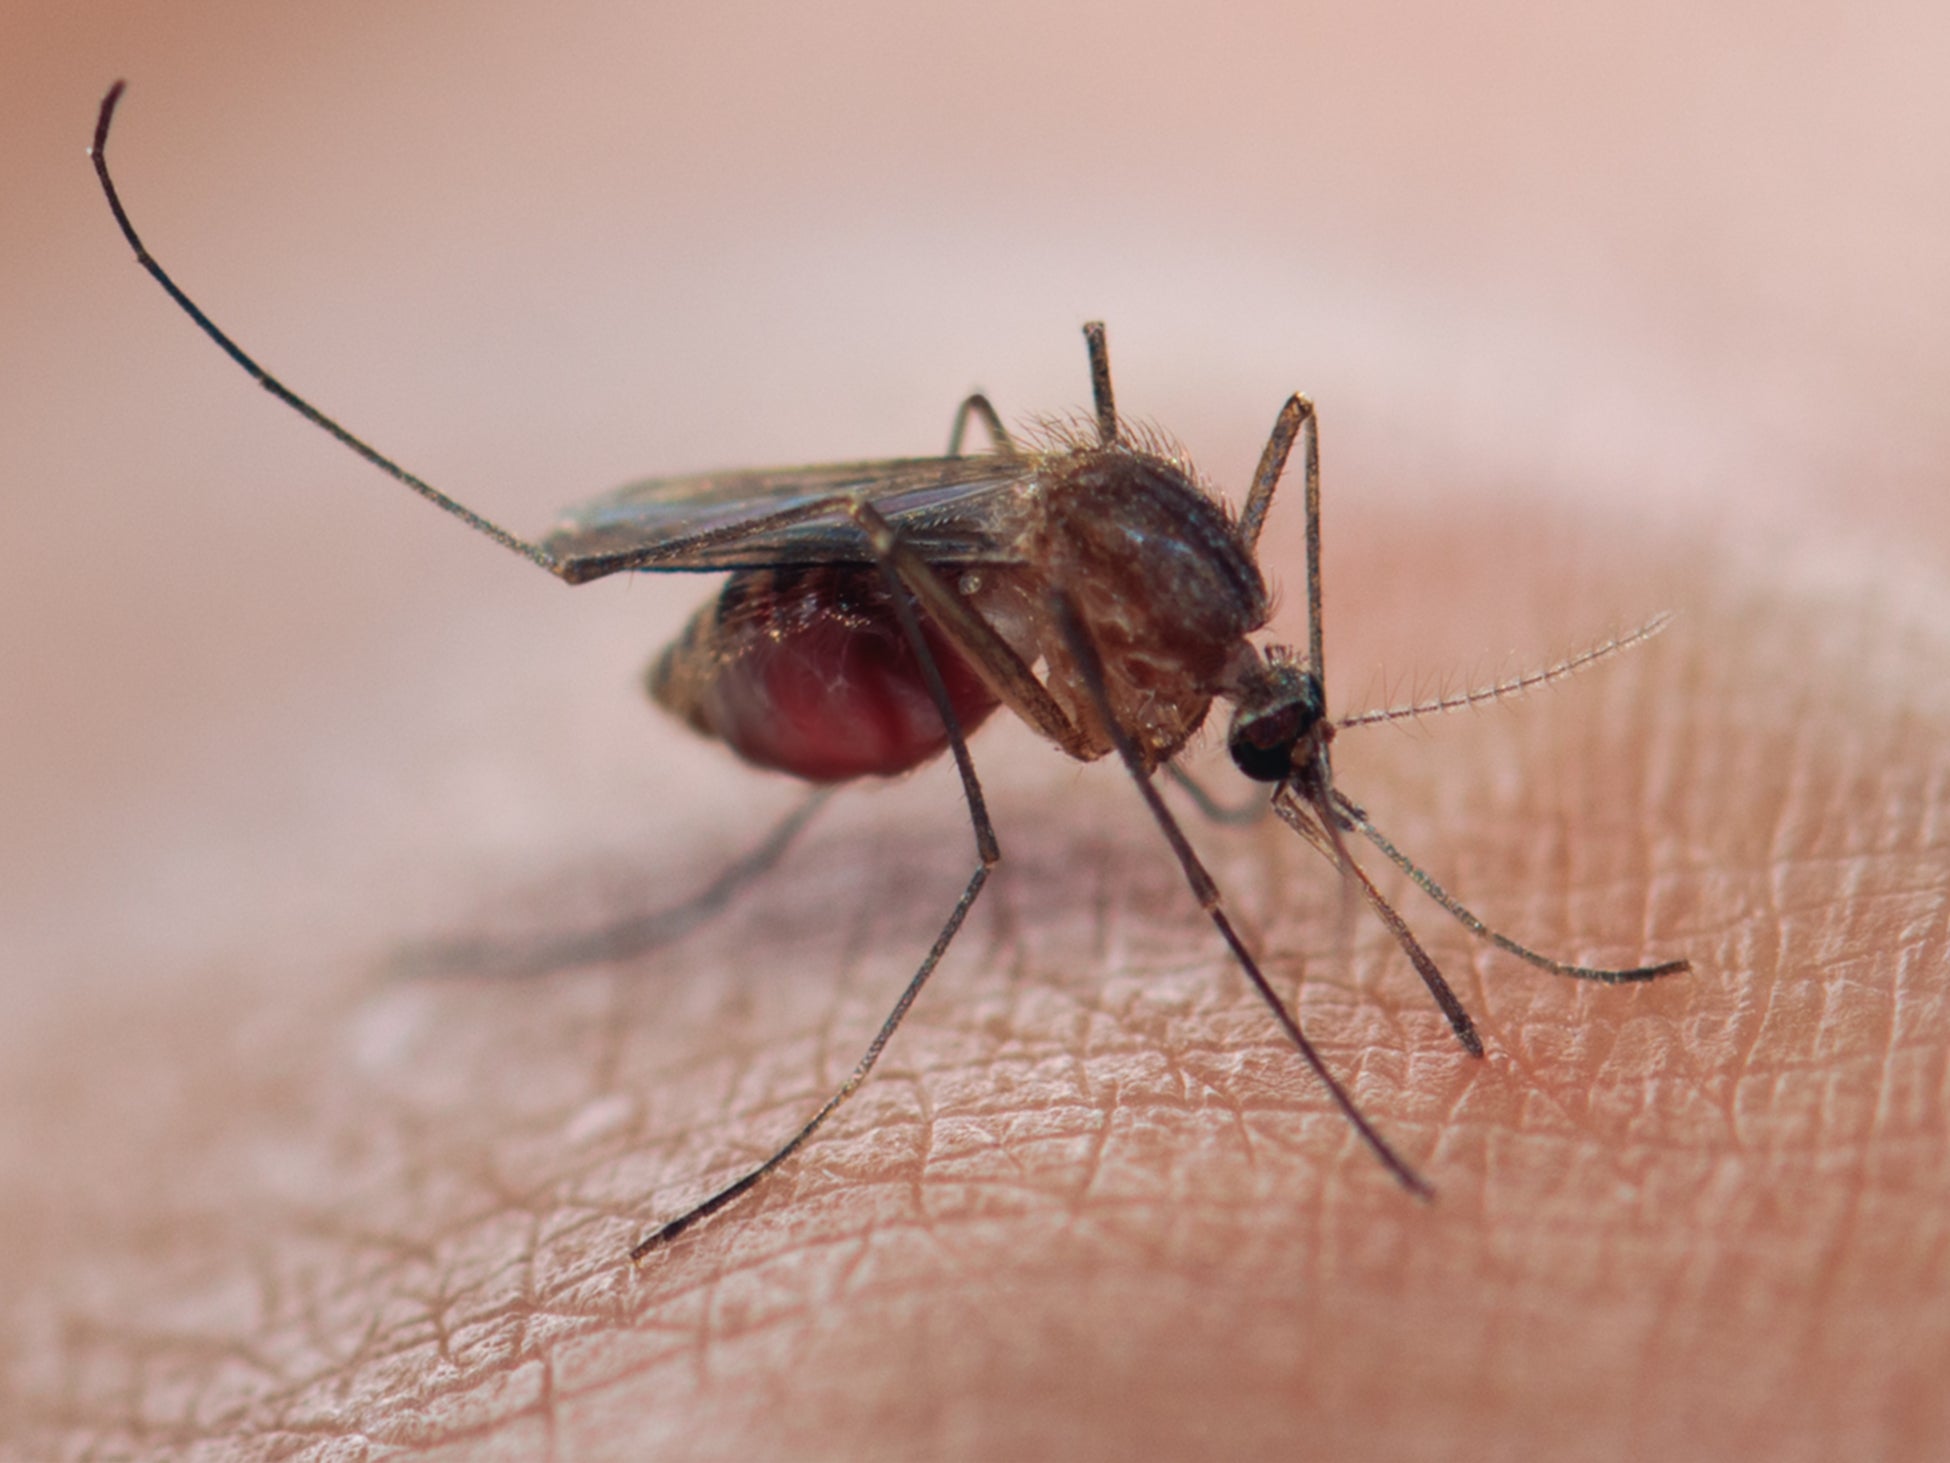 There were 409,000 deaths from malaria in 2019, with 274,000 of those among children under 5 years old